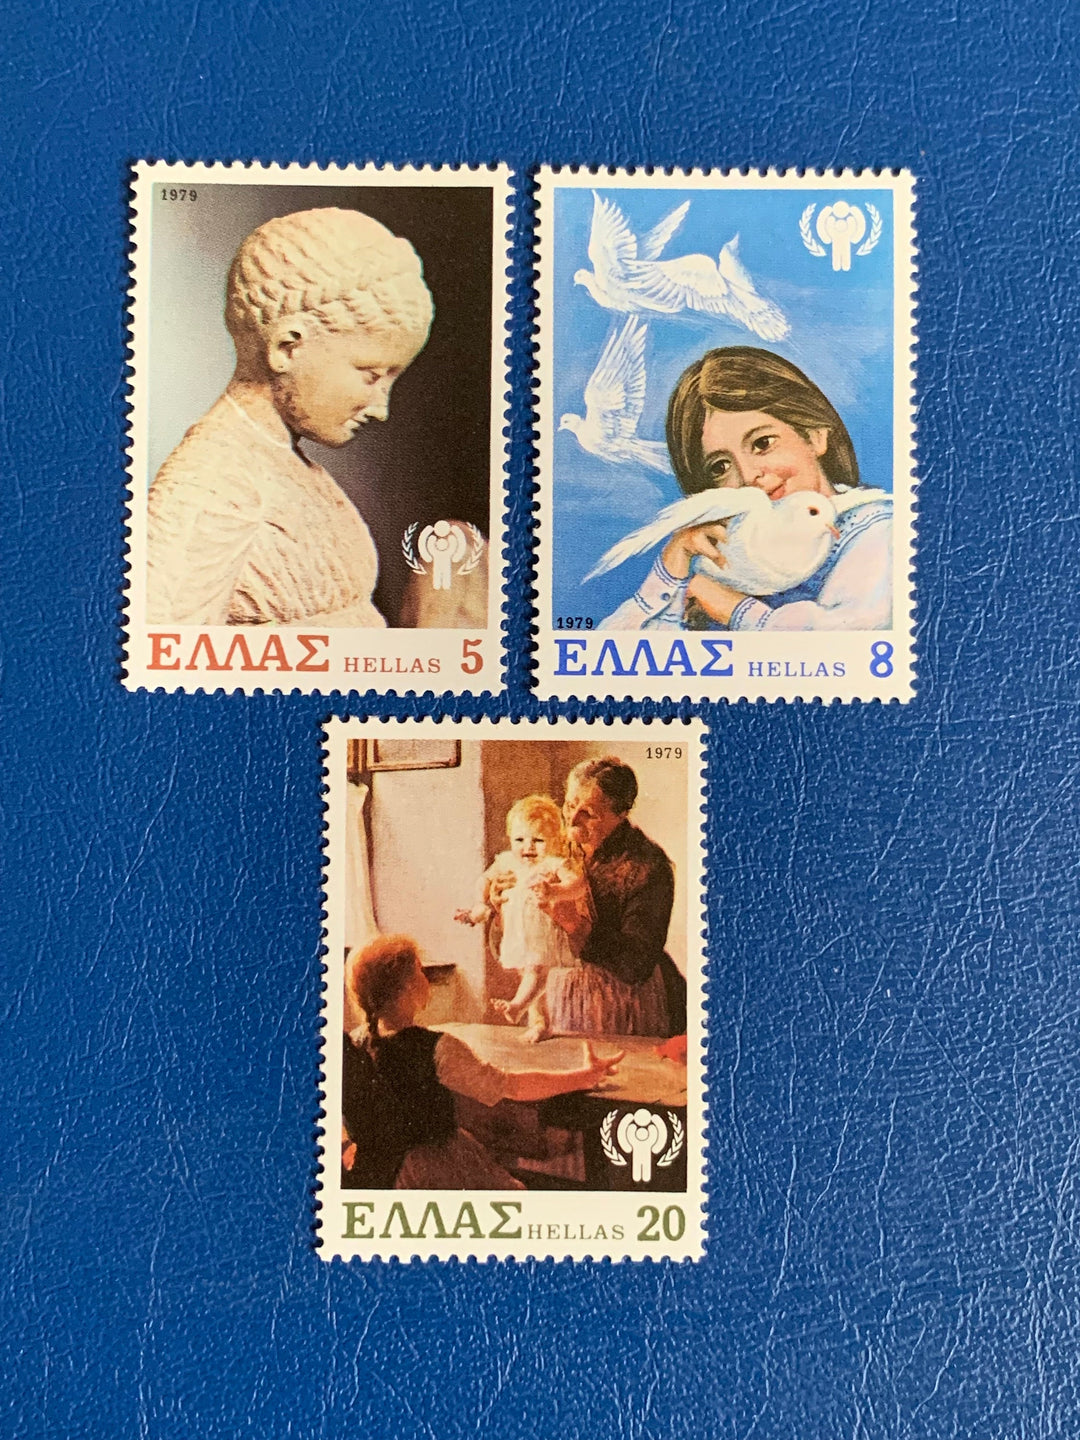 Greece - Original Vintage Postage Stamps- 1979 - Year of the Child -for the collector, artist or collector - scrapbooks, decoupage